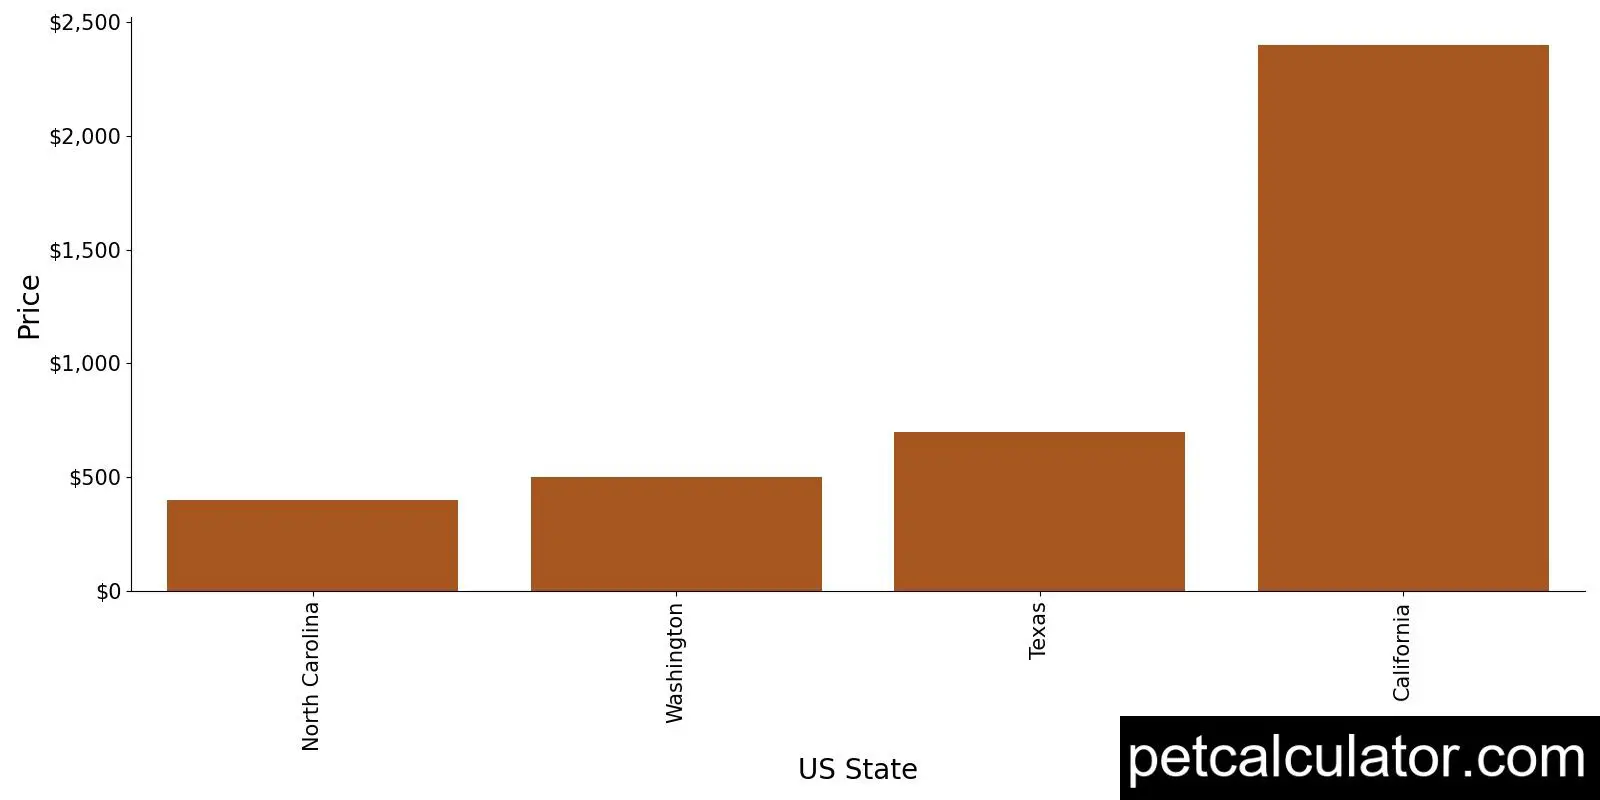 Price of German Pinscher by US State 